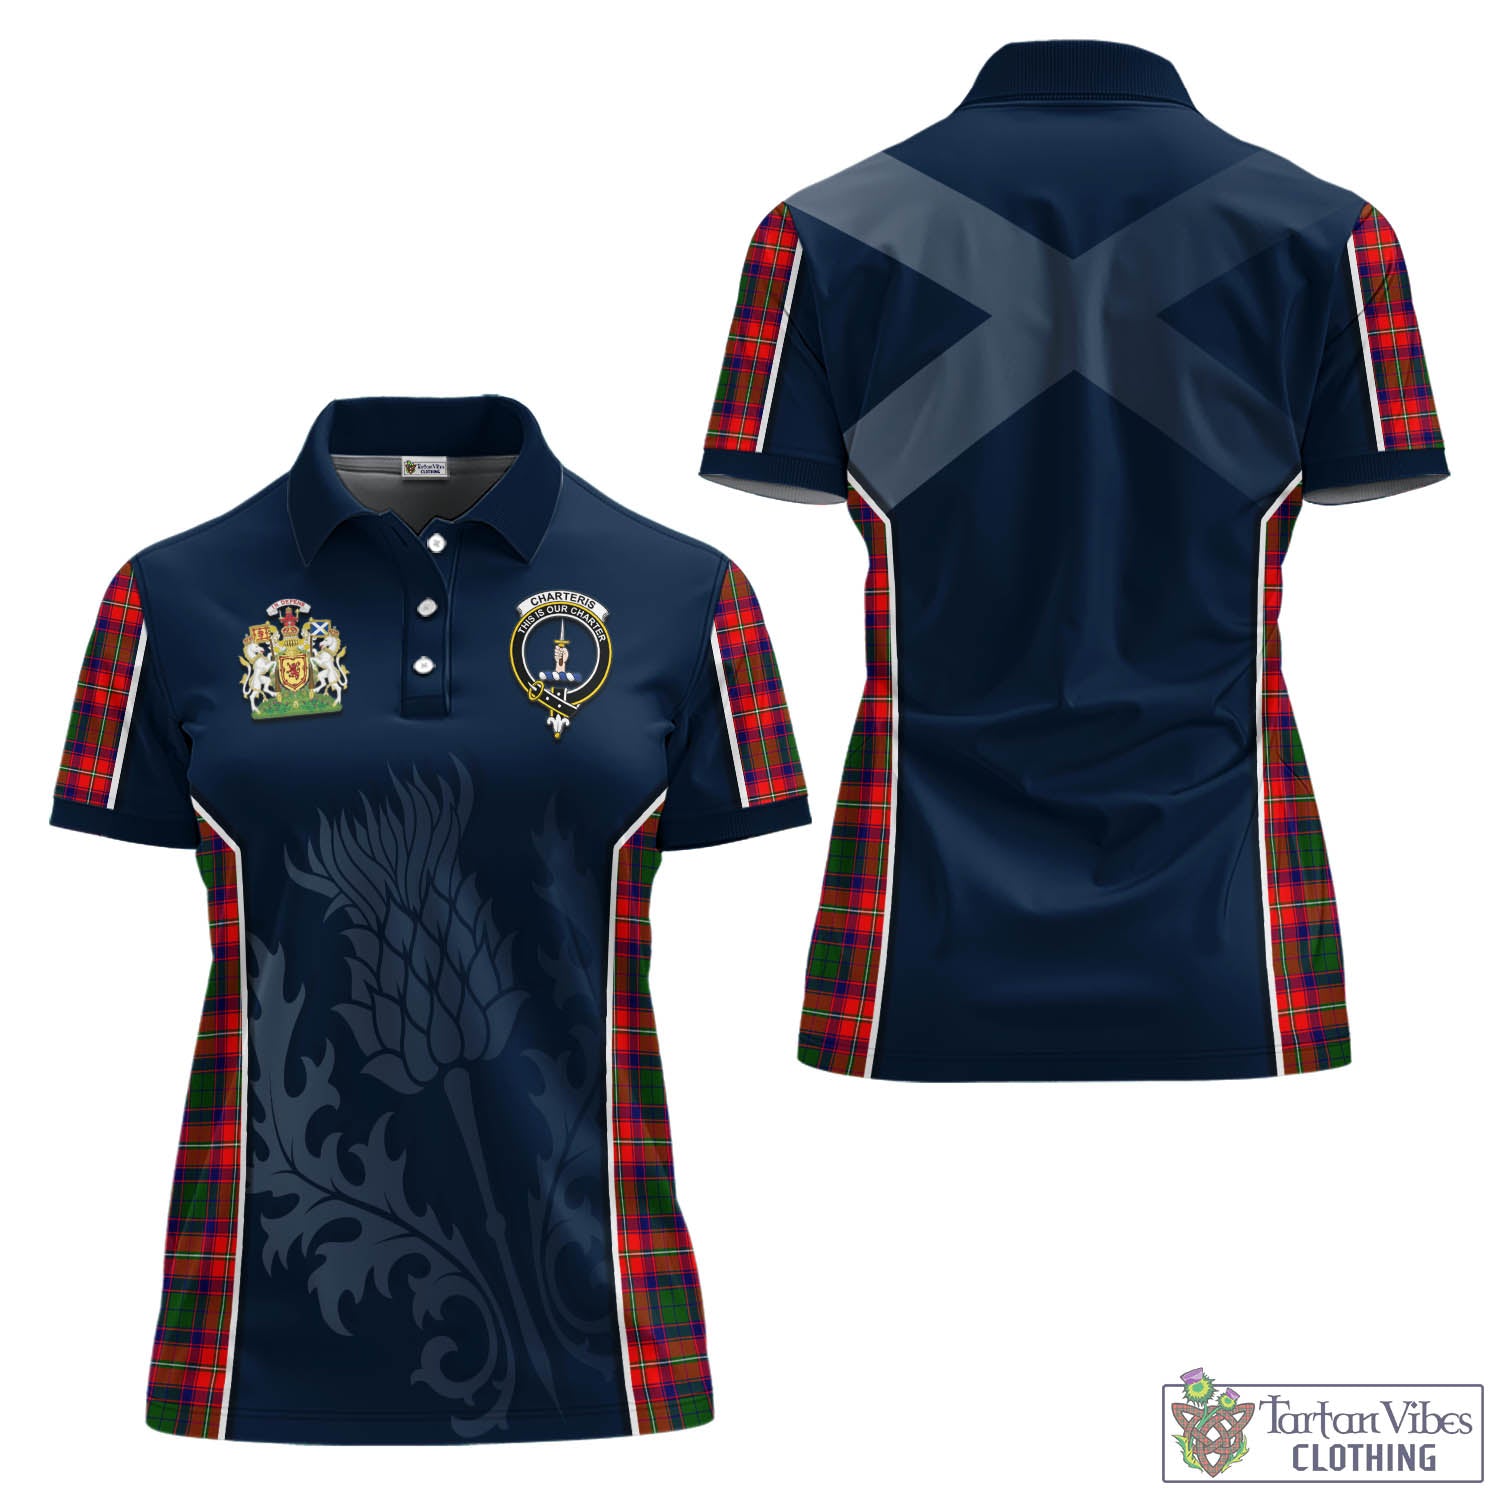 Tartan Vibes Clothing Charteris Tartan Women's Polo Shirt with Family Crest and Scottish Thistle Vibes Sport Style